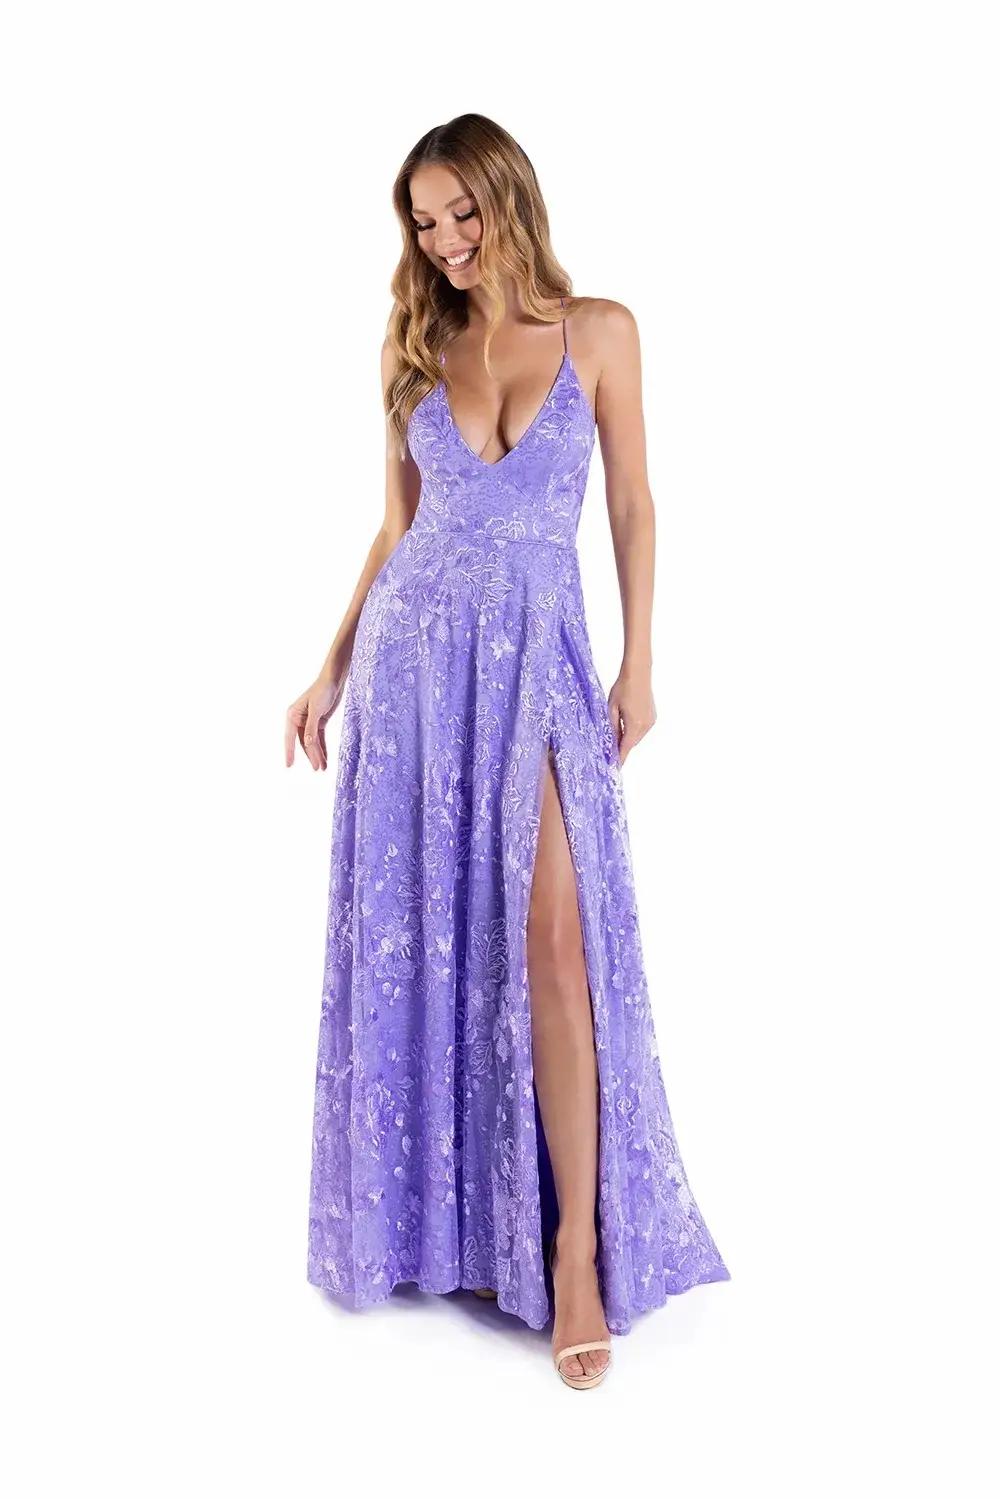 Model wearing a Lucci Lu Spring purple gown